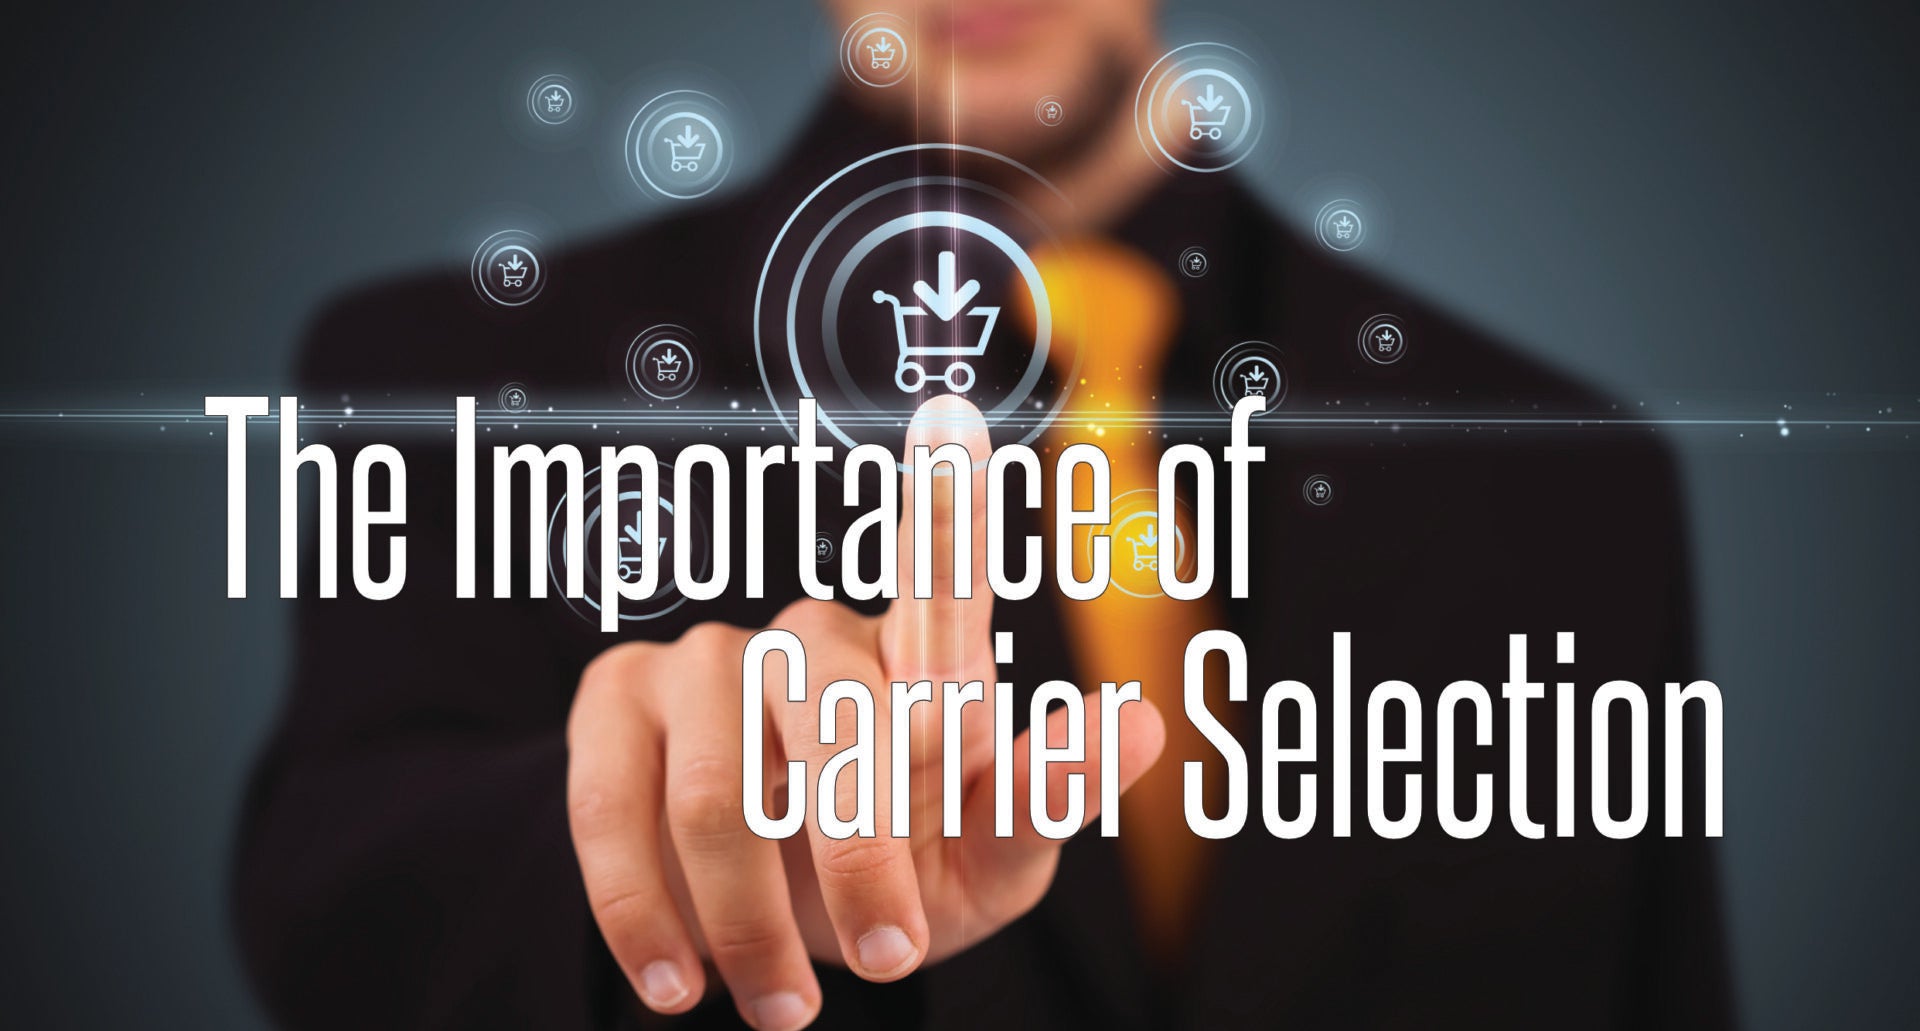 Carrier Selection